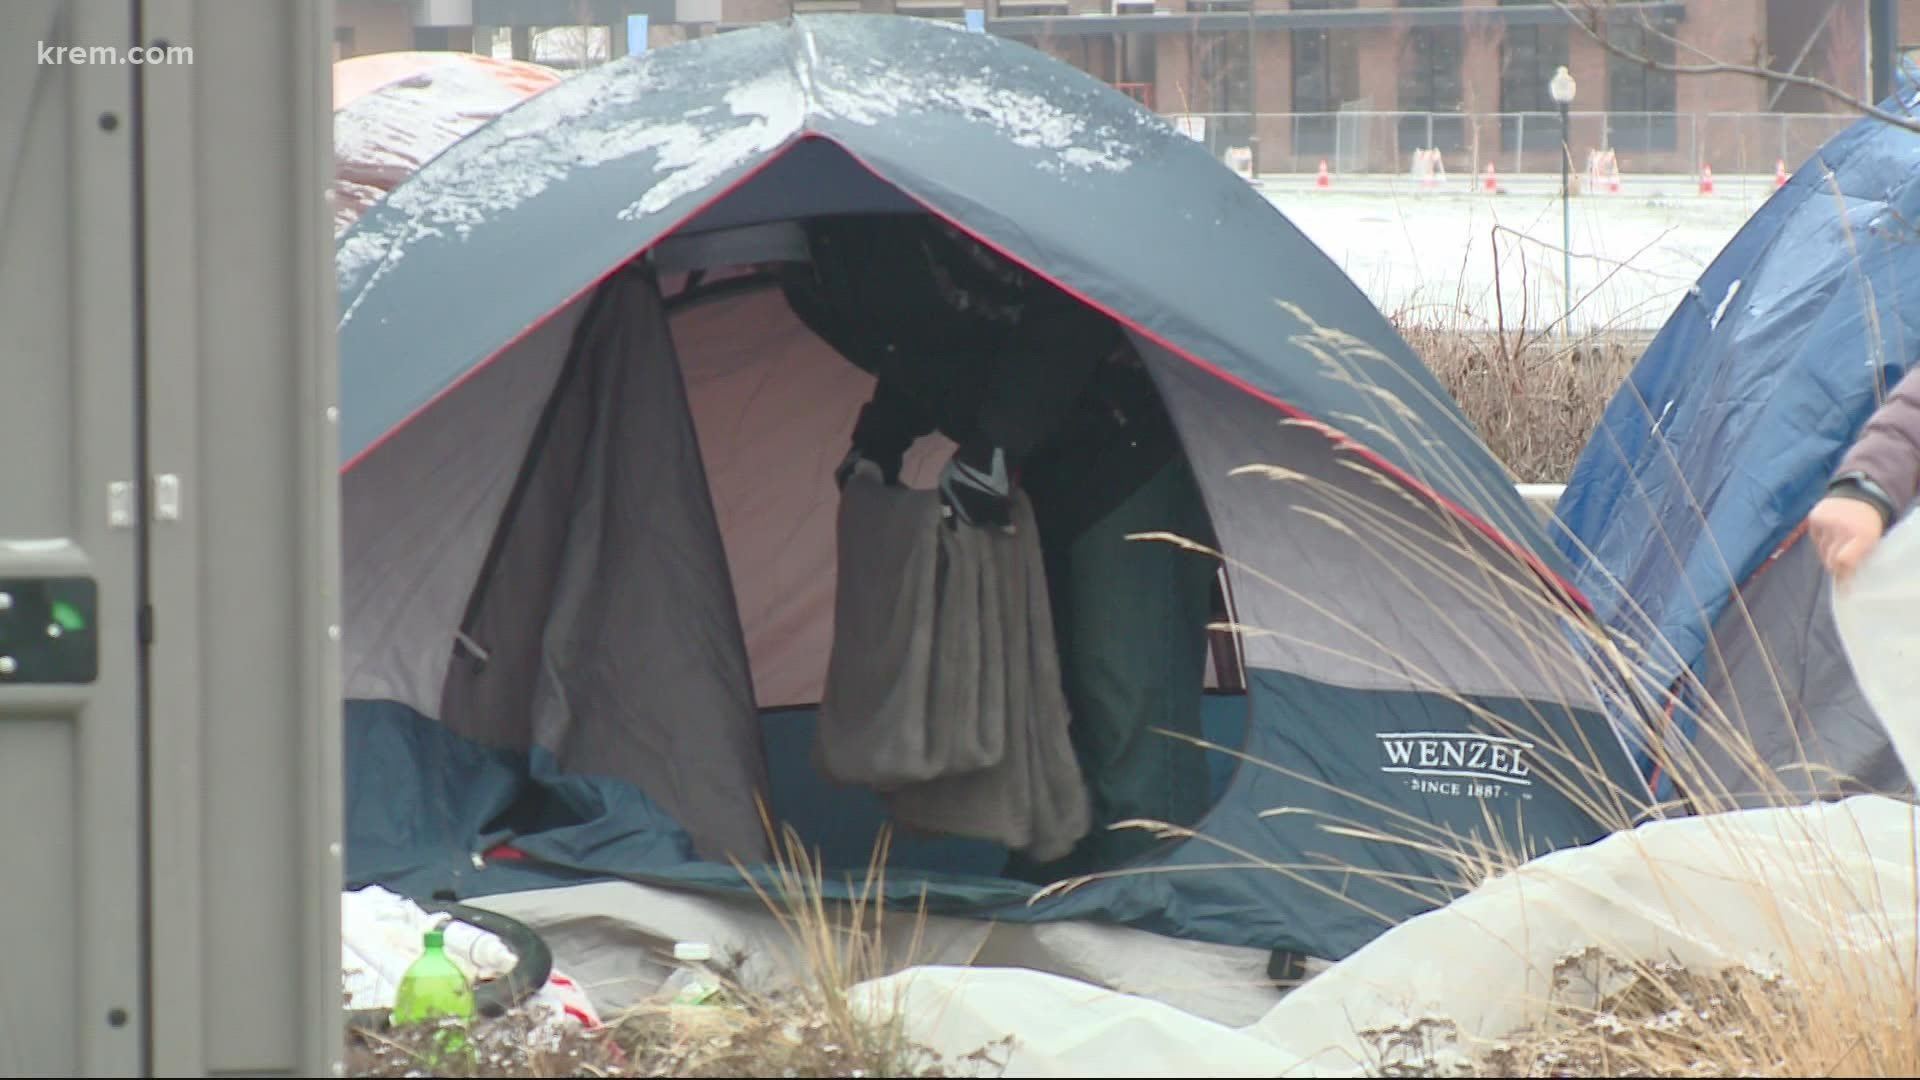 Campers in downtown Spokane were told to leave by Thursday morning. The campers are protesting what they say is a lack of shelter space in Spokane.